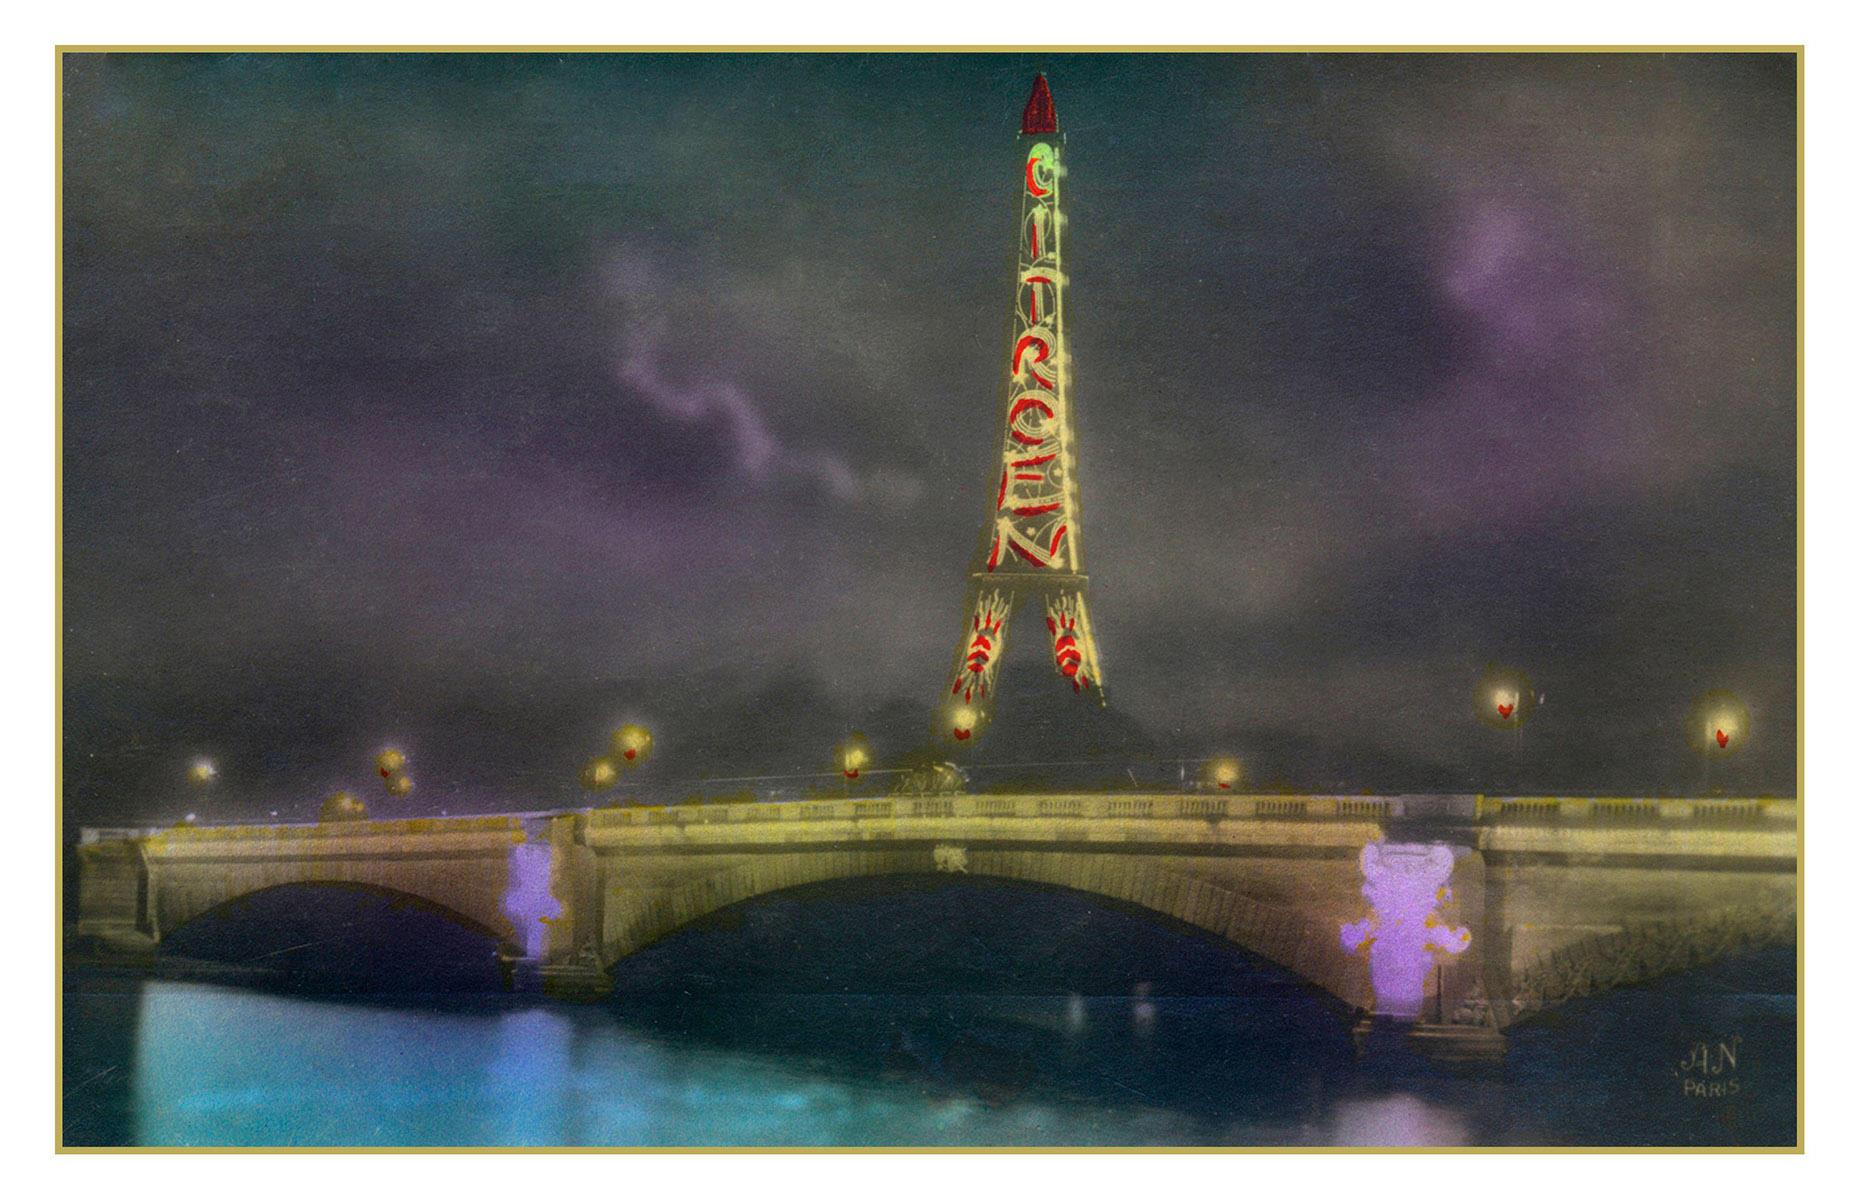 <p>It wasn’t the first time the Eiffel Tower was used for promotional purposes. From 1925 to 1935 the car manufacturer Citroen used the tower as a giant billboard. The name 'Citroen' was sculpted in letters 99 feet high and illuminated by 250,000 colored lamps. It was visible more than 18 miles away and recognized by the Guinness Book of Records as the biggest advertisement in the world at the time.</p>